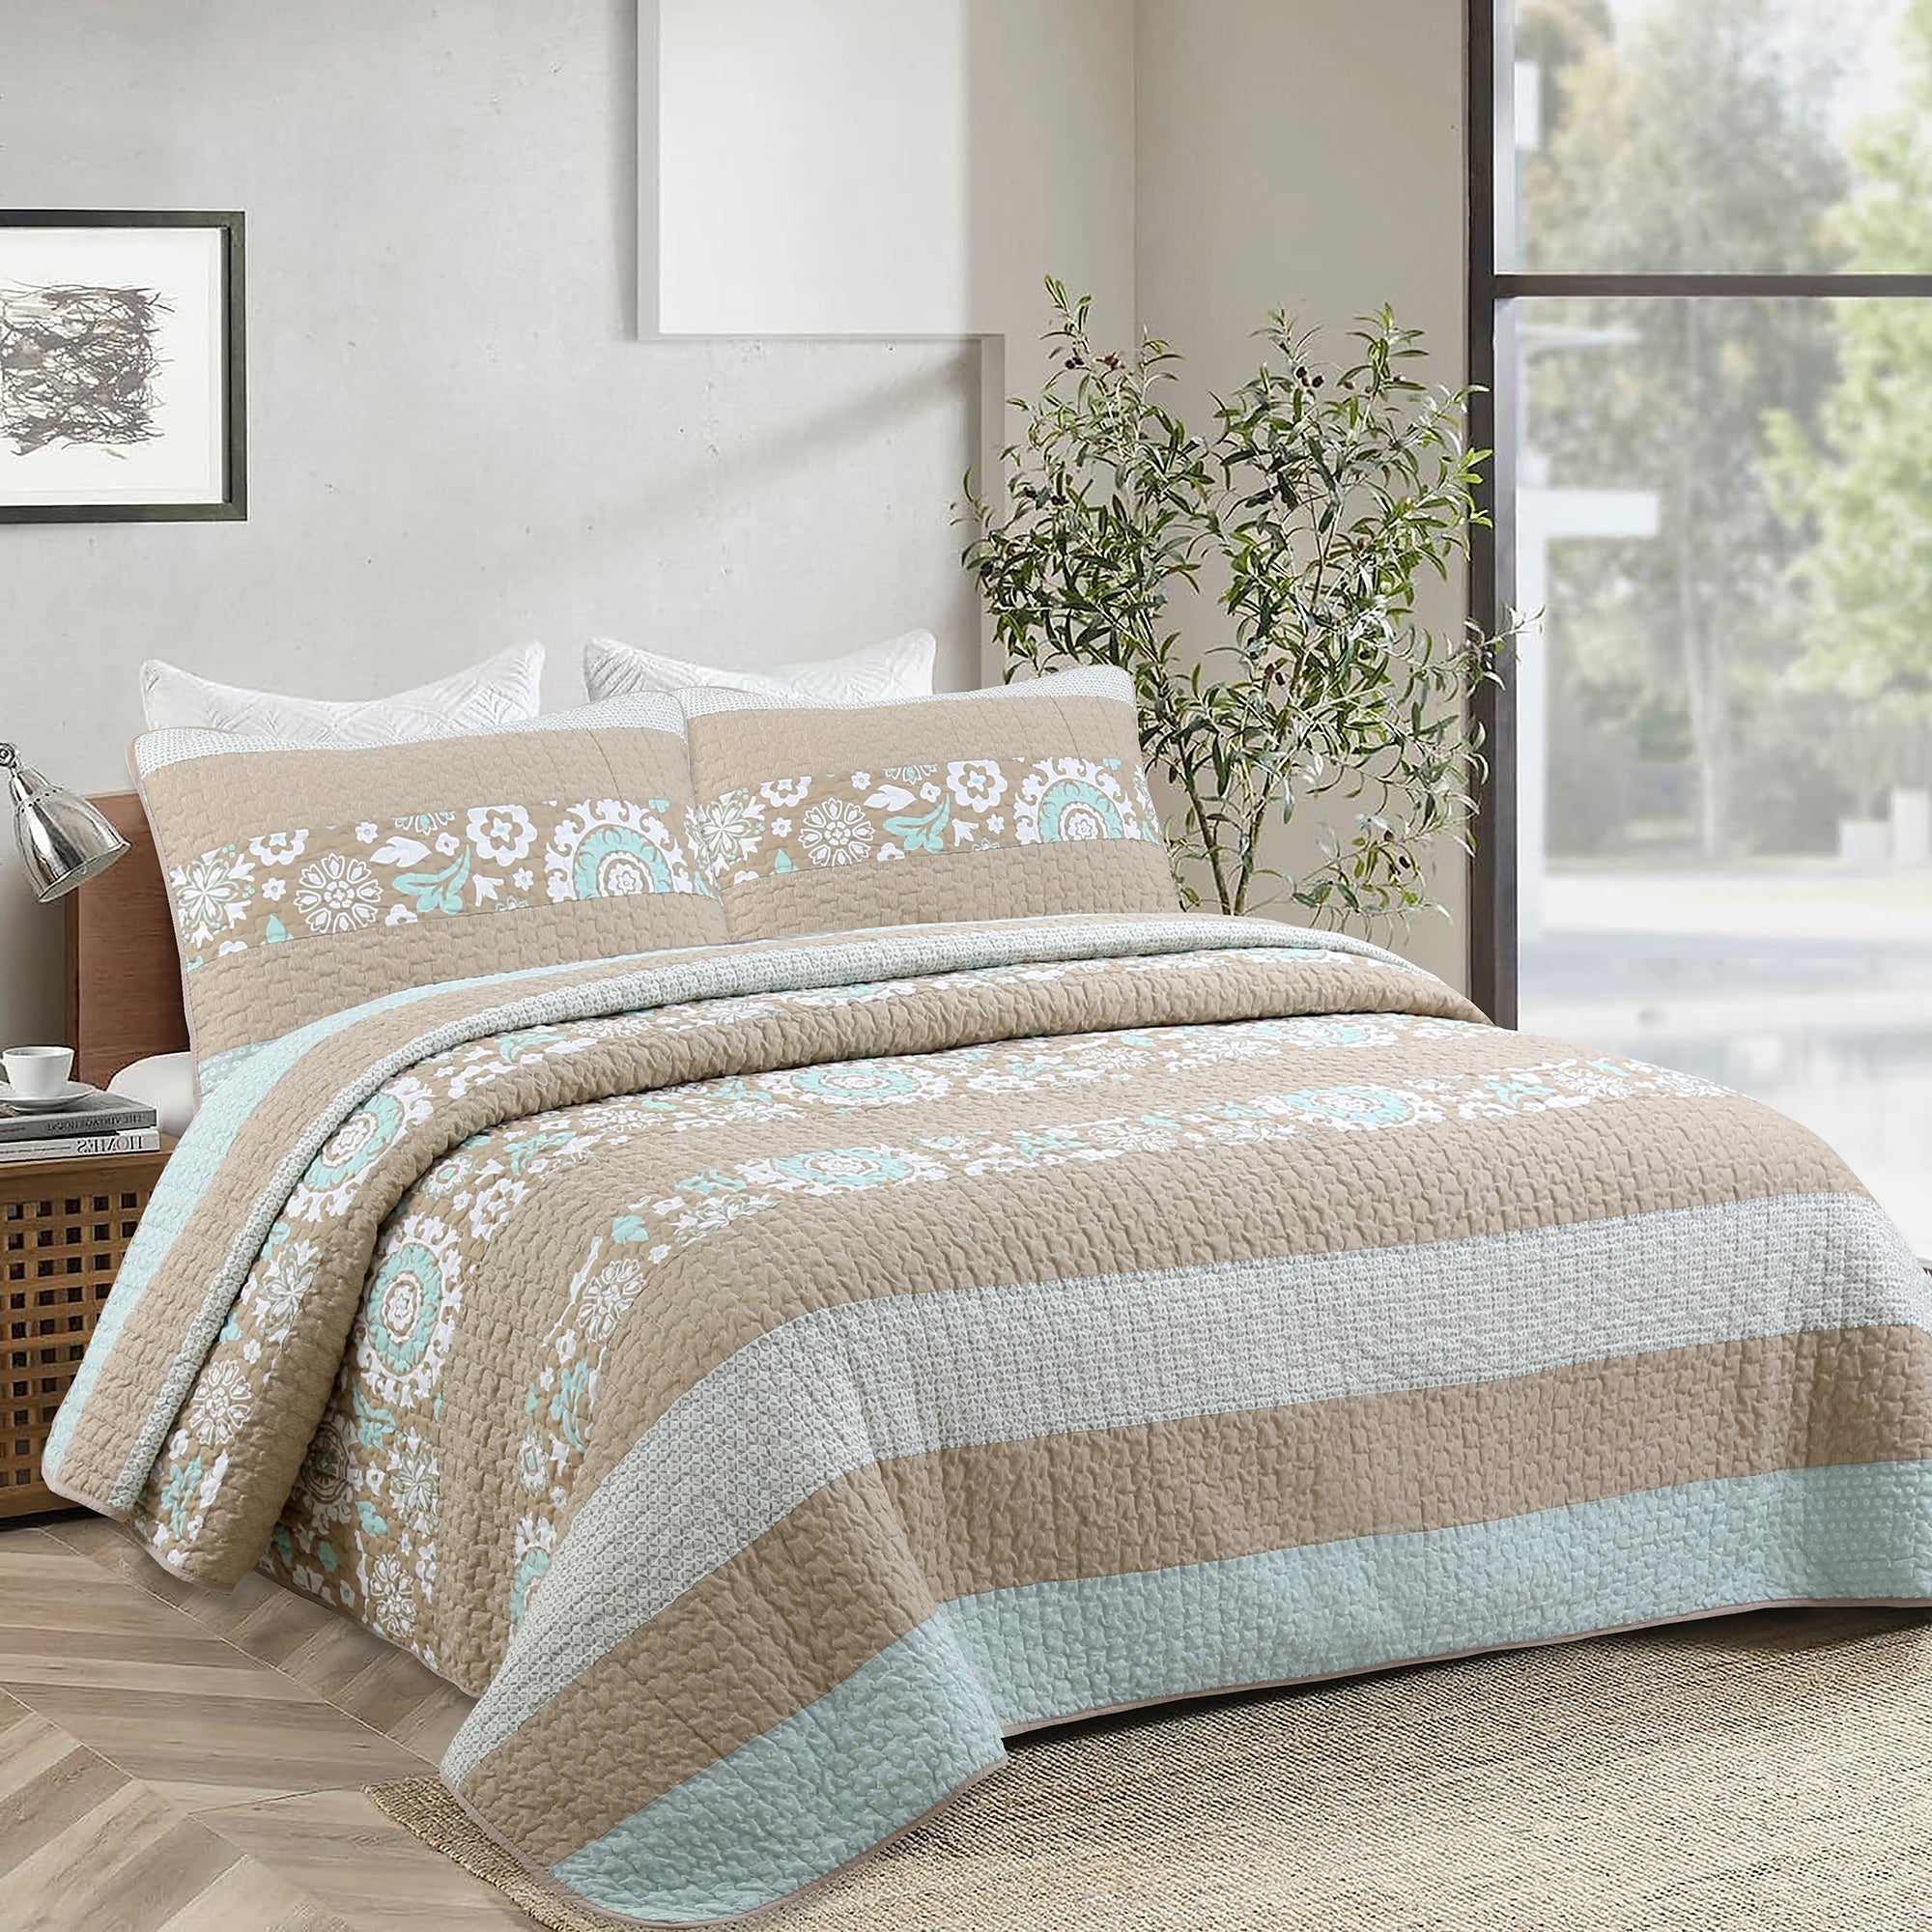 Ginny's Mint Green Electric Can Ope, Catalog Company Returns;  Household, Kitchen, Bedding, More!